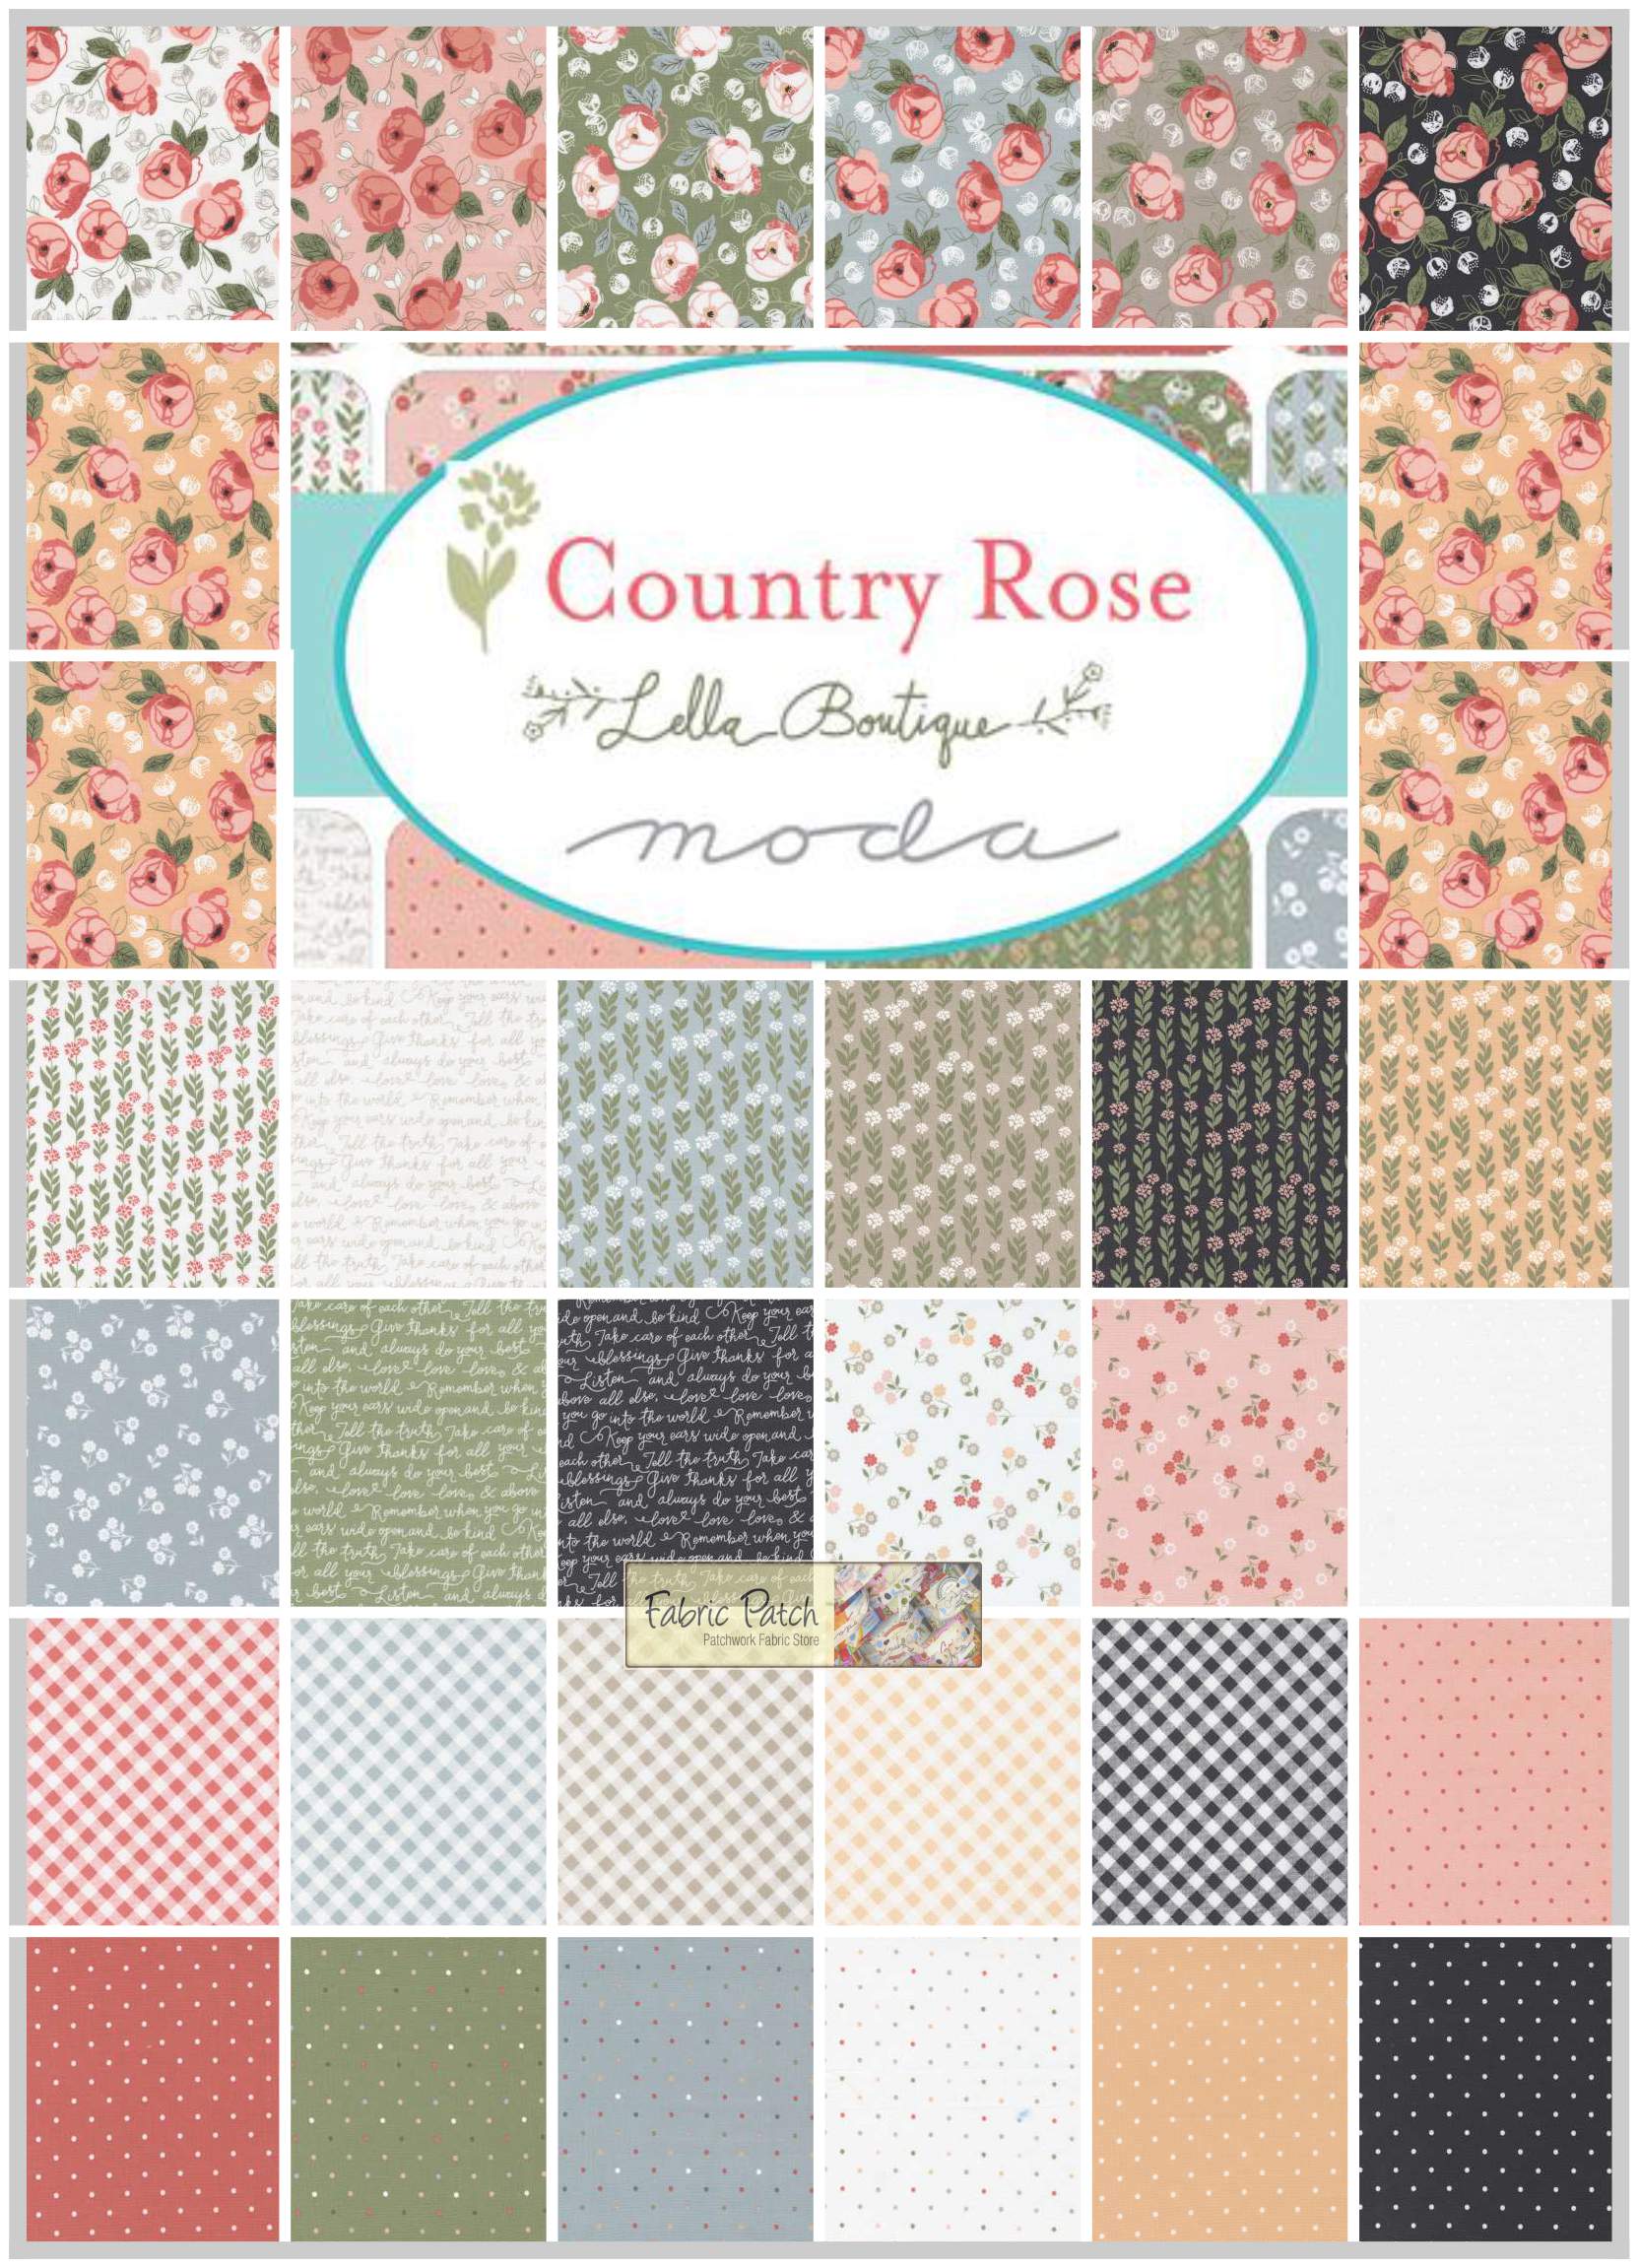 Country Rose 32 Pce Fat Quarter Bundle

Applique, patchwork and quilting fabric.

Fabric Range by Lella Boutique for Moda Fabrics.